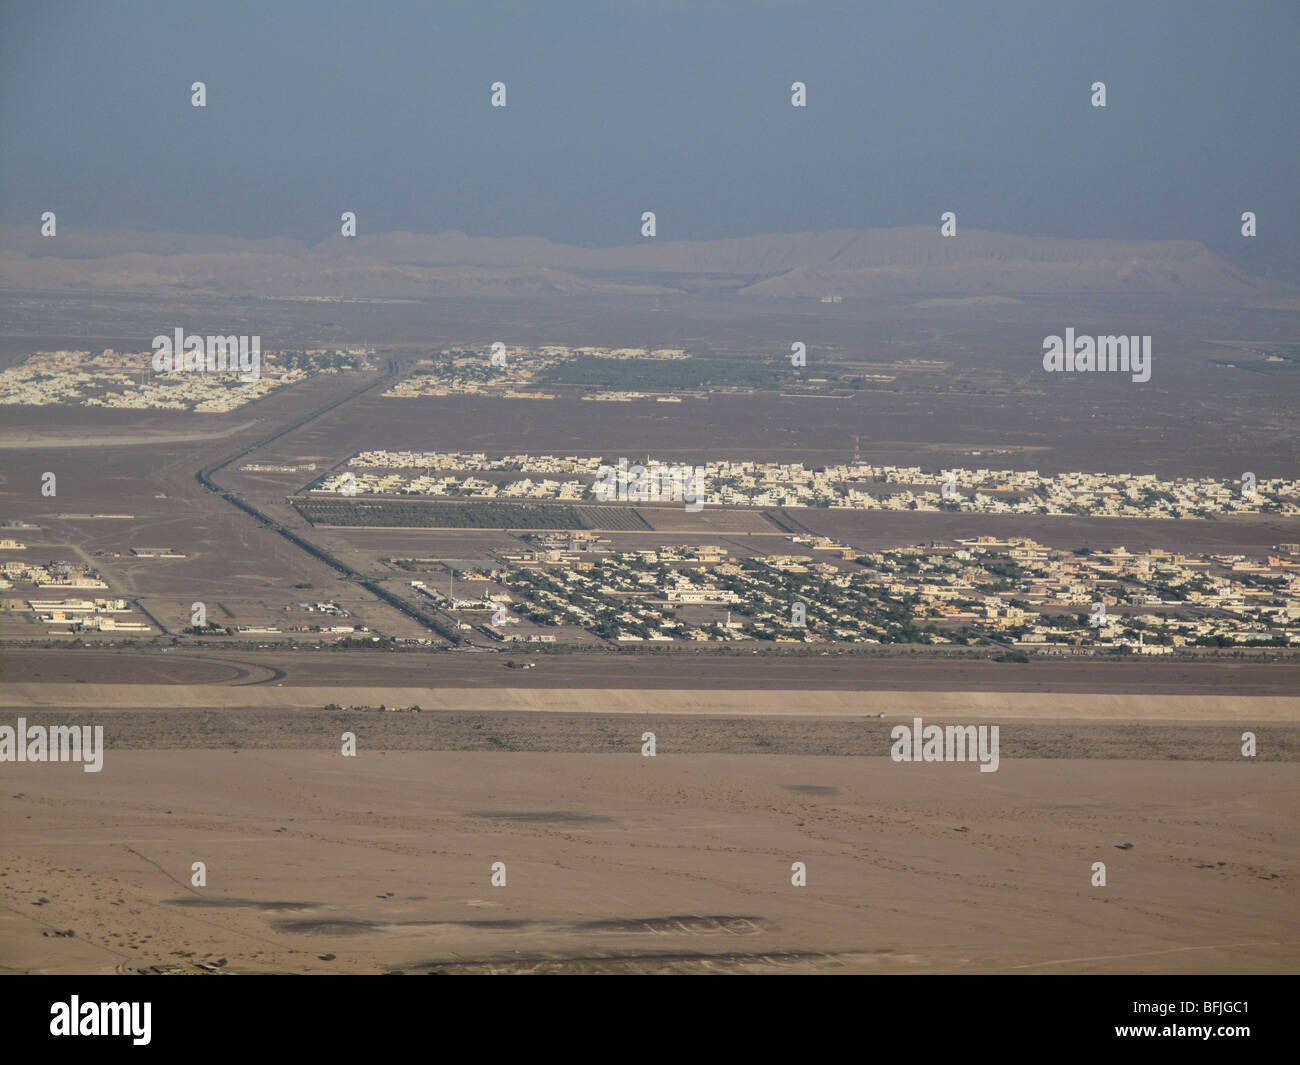 View from Jebel Hafeet mountain of single storey buildings and town in oasis town of Al Ain, UAE Stock Photo